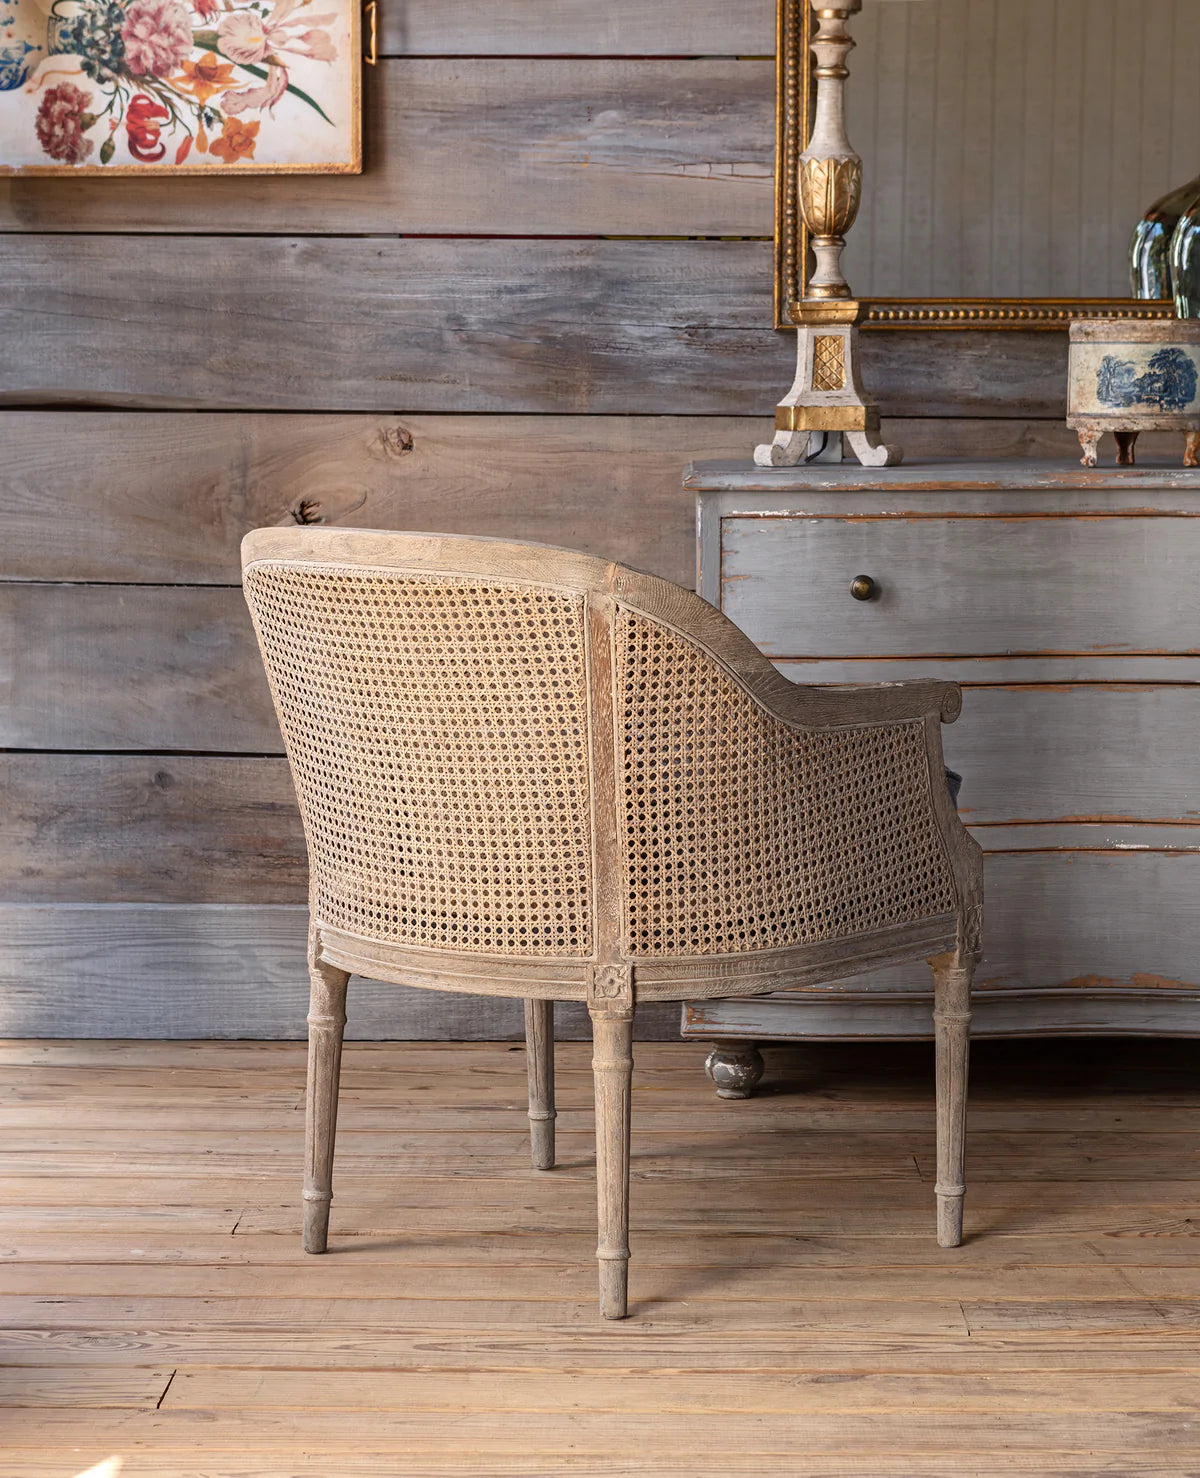 French Cane Lounge Chair for sale, Restoration Hardware Cane Back Chairs